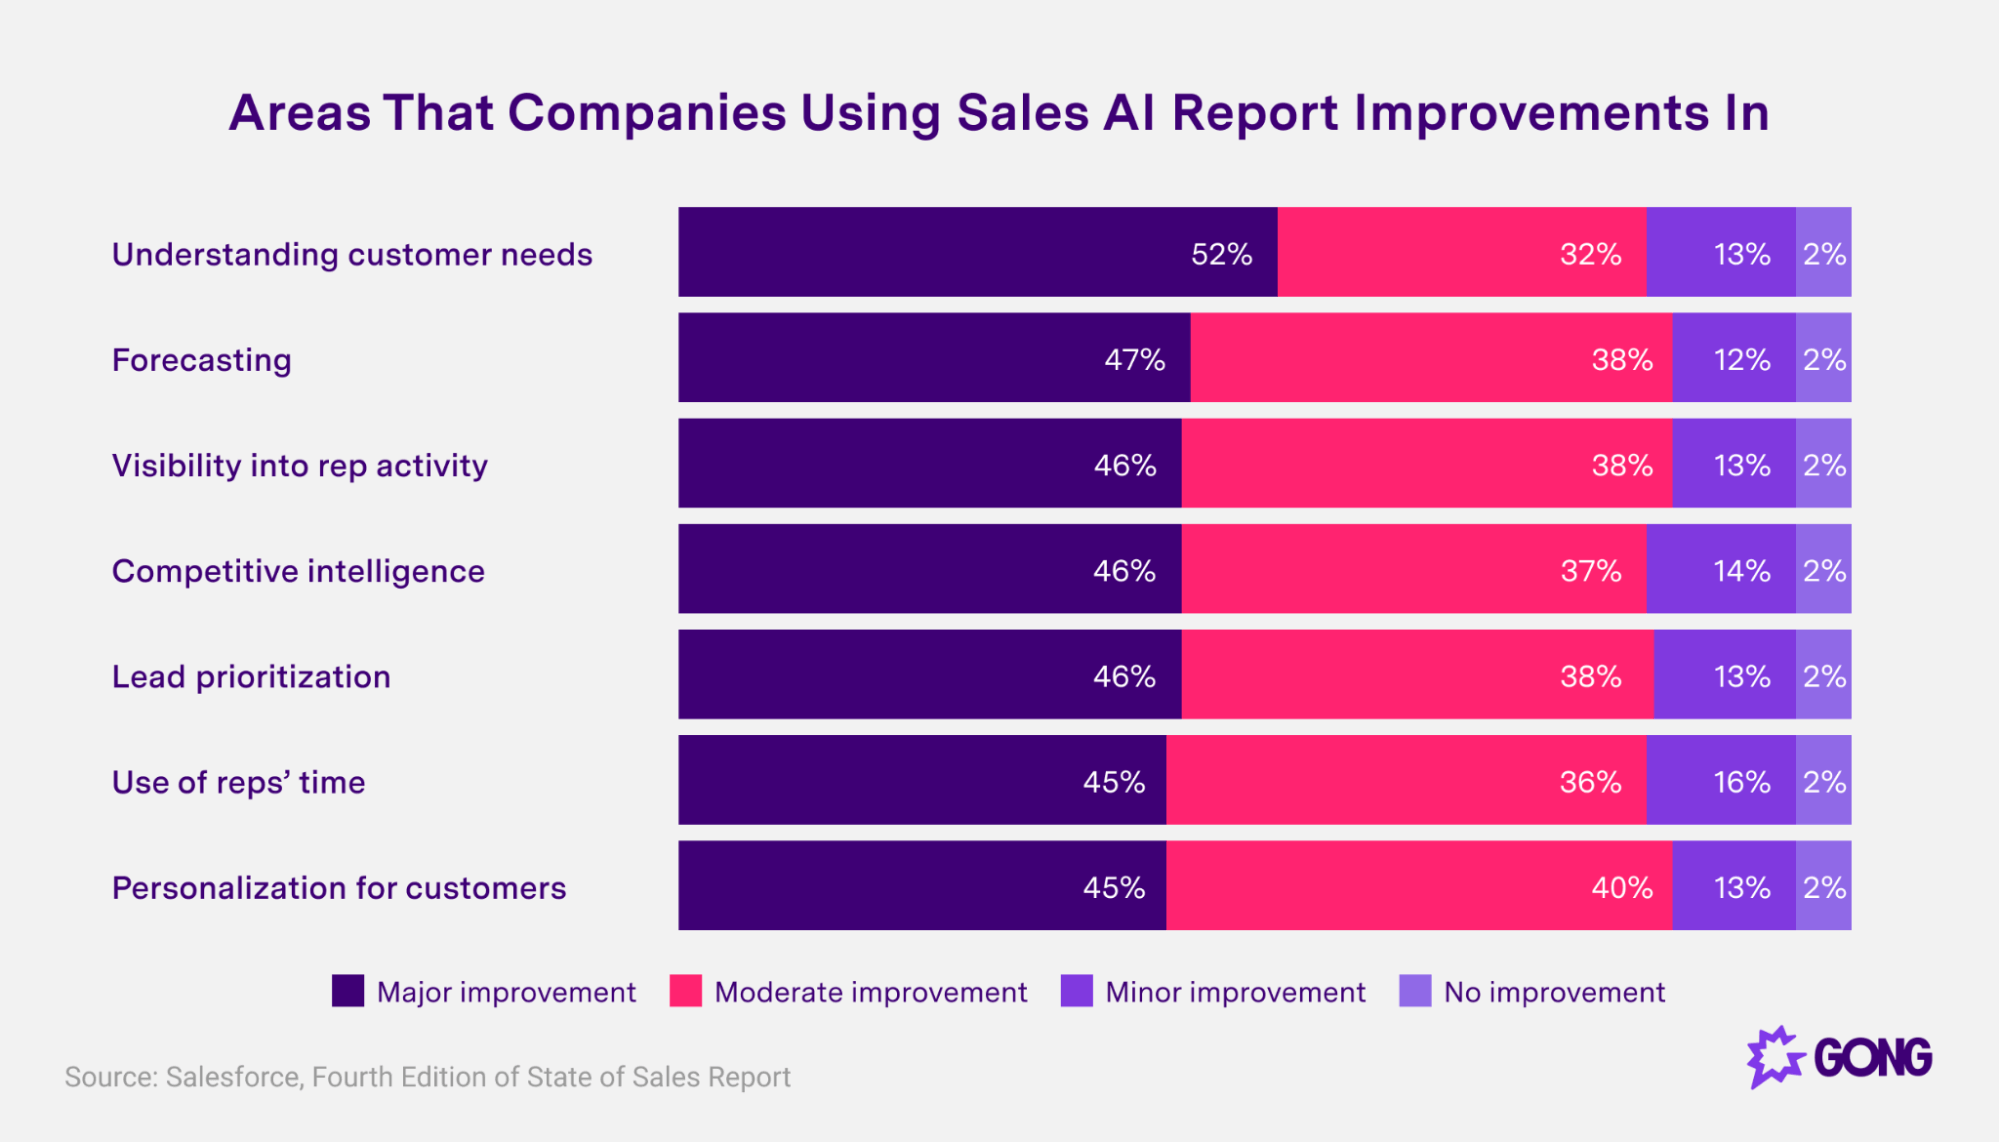 Areas that companies using sales AI report improvements in